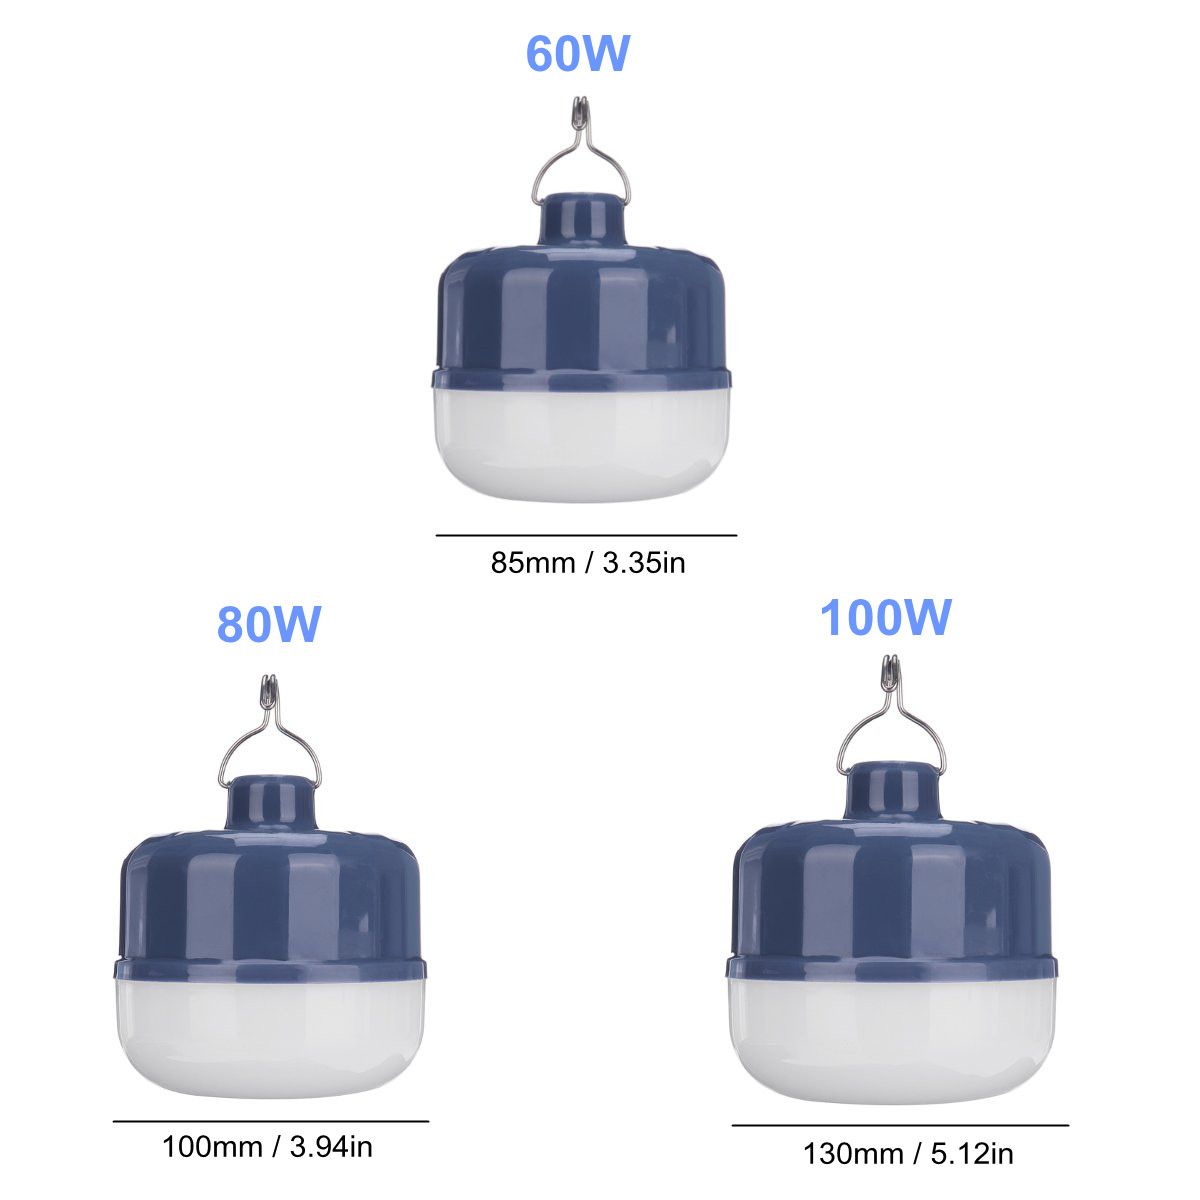 60W-80W-100W-USB-Rechargeable-LED-Camping-Light-Bulb-Portable-Outdoor-Hanging-Night-Lamp-with-Remote-1696929